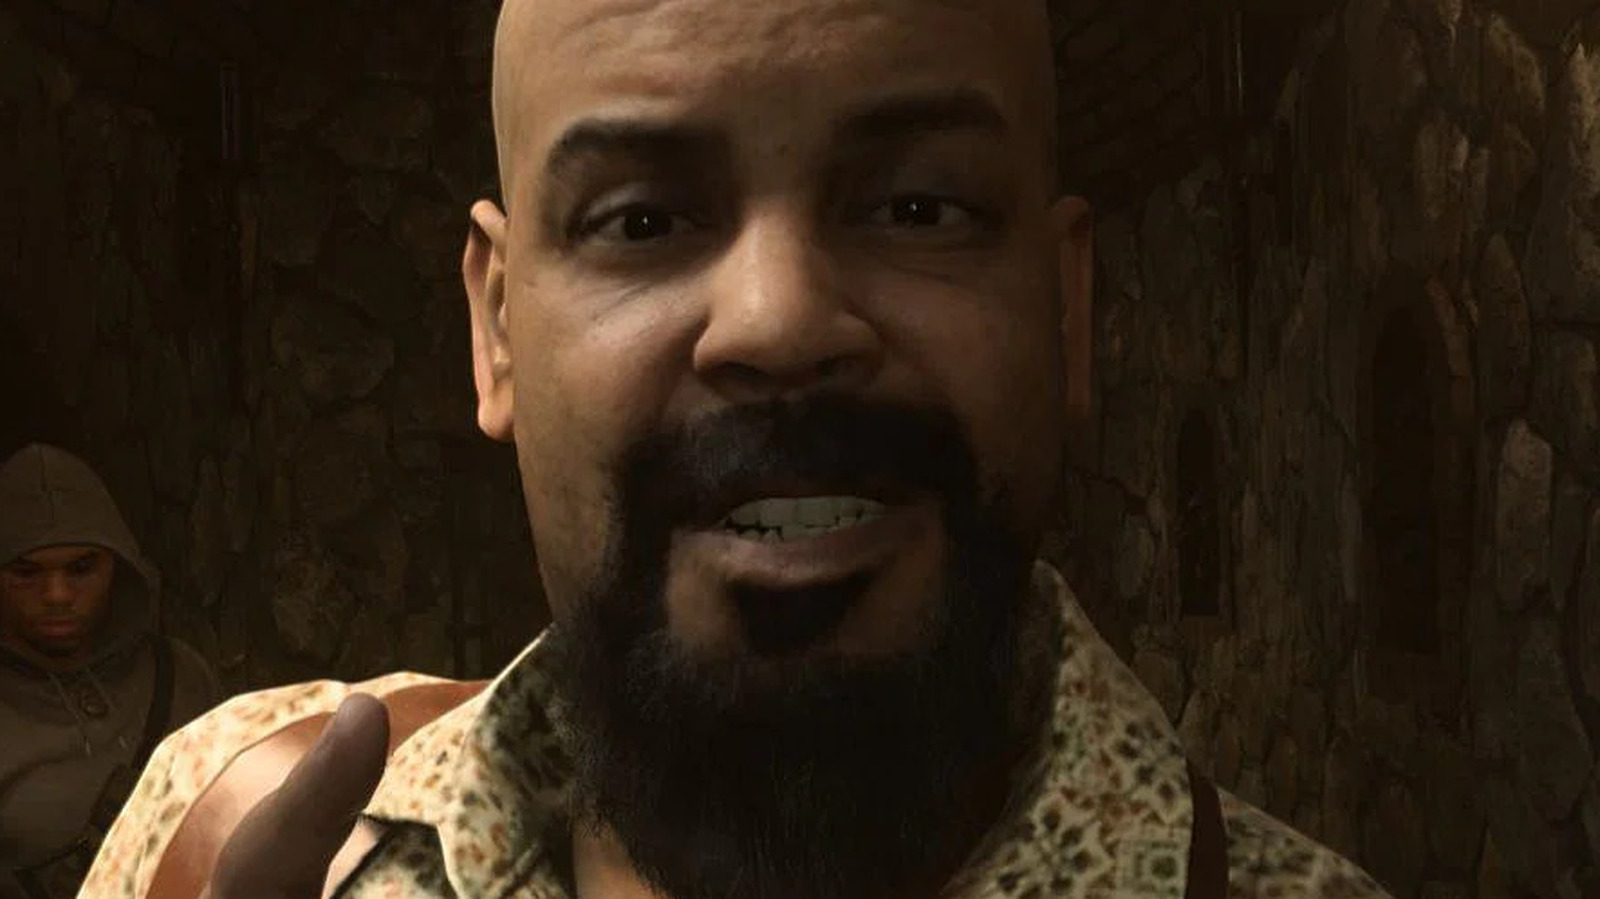 Modern Warfare 2: What's The Safe Code For Diego's Apartment?